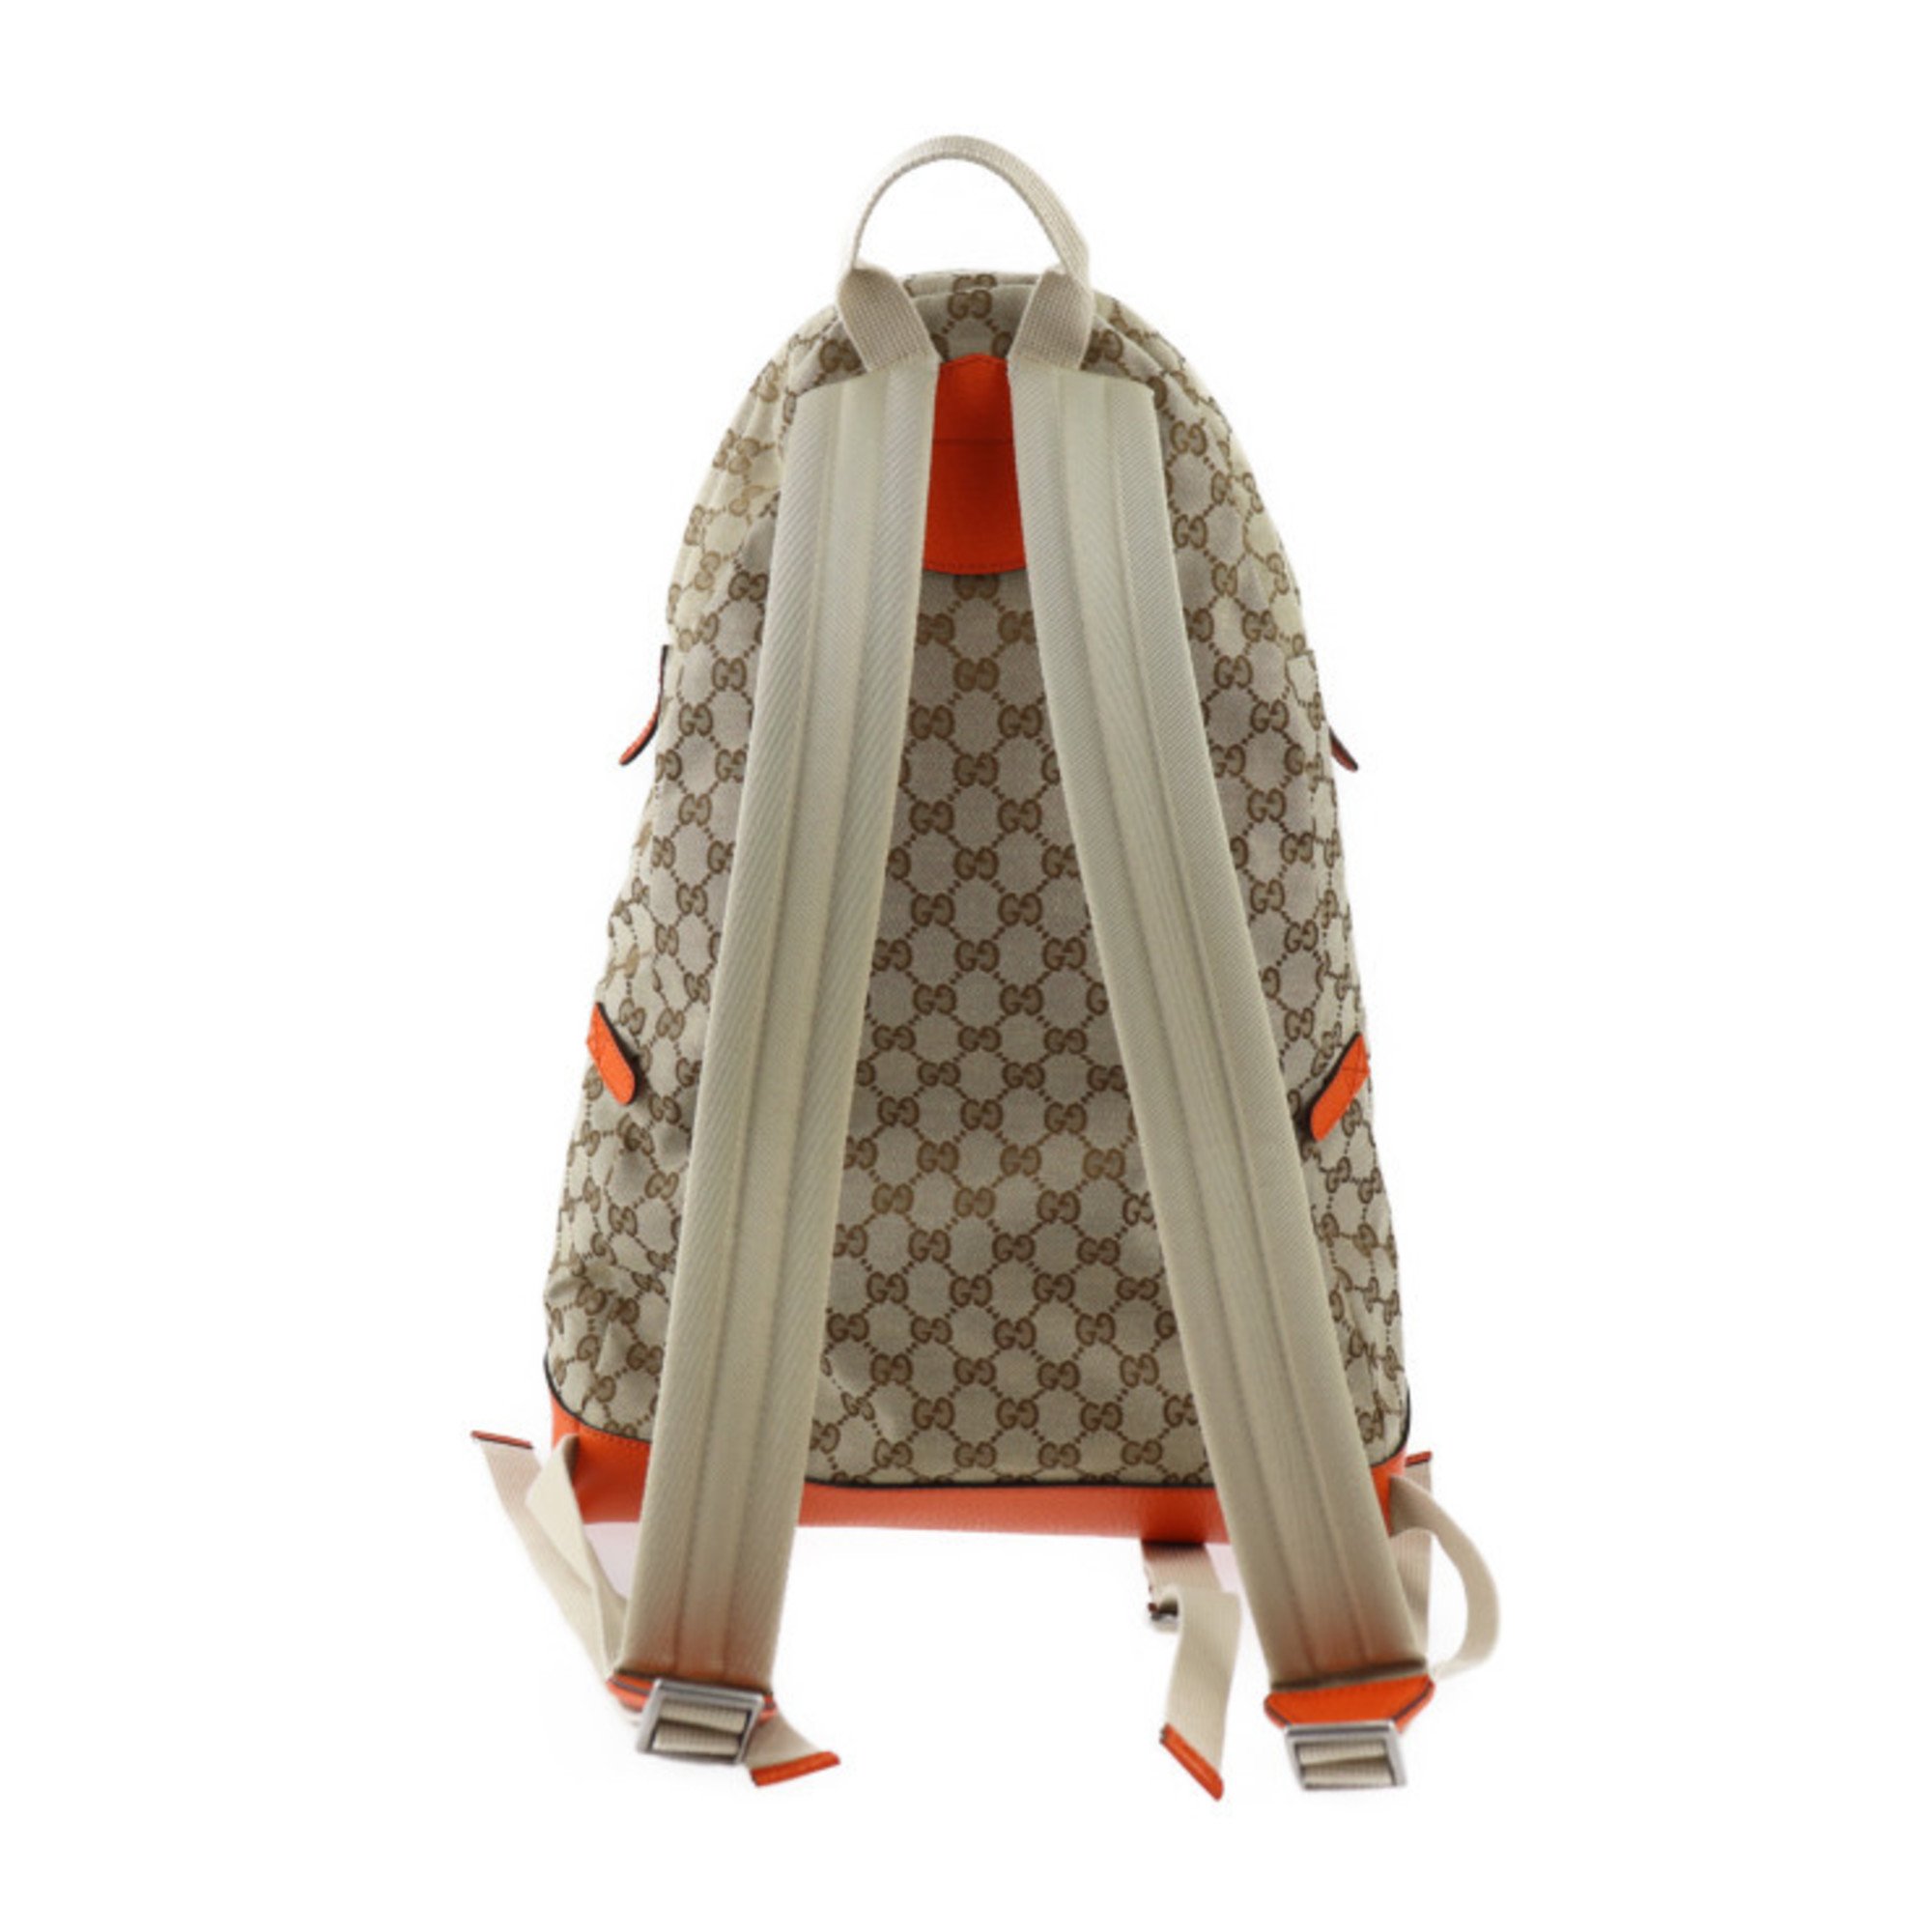 GUCCI Gucci THE NORTH FACE Collaboration Rucksack/Daypack 650288 GG Canvas Leather Beige Orange Silver Hardware Backpack